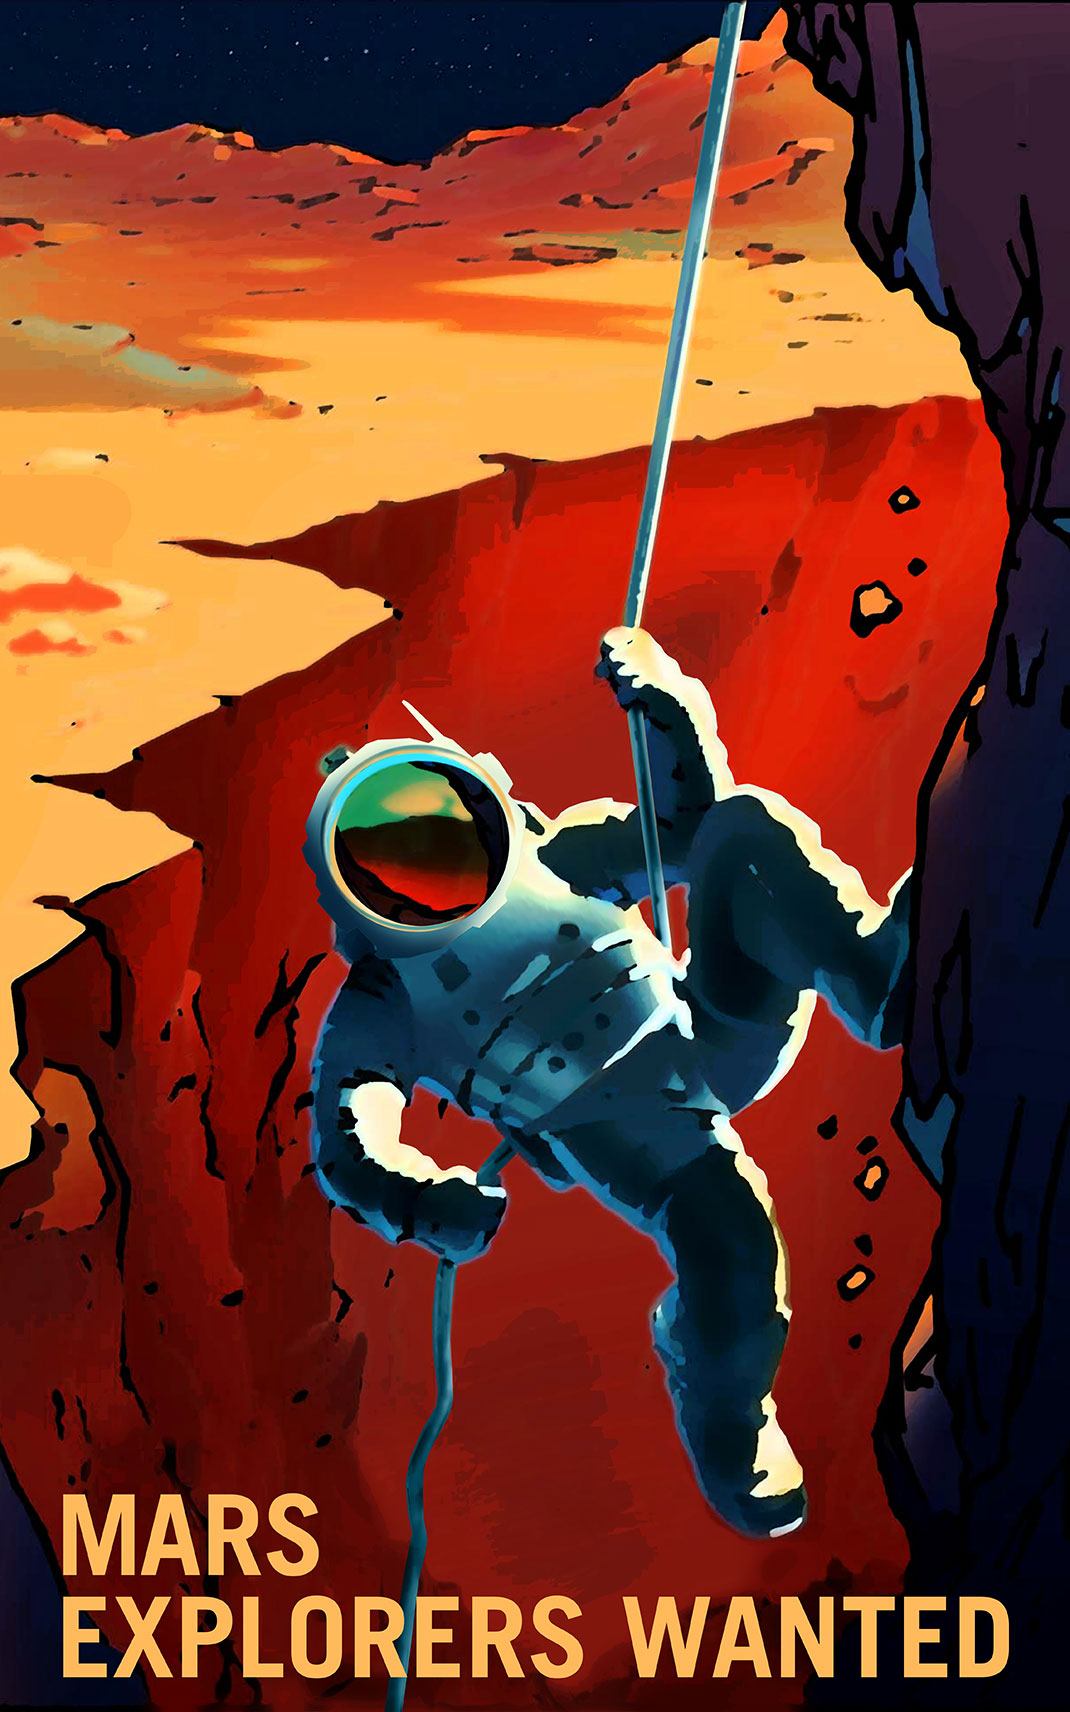 NASA Recruitment Posters Will Inspire You To Conquer Mars-